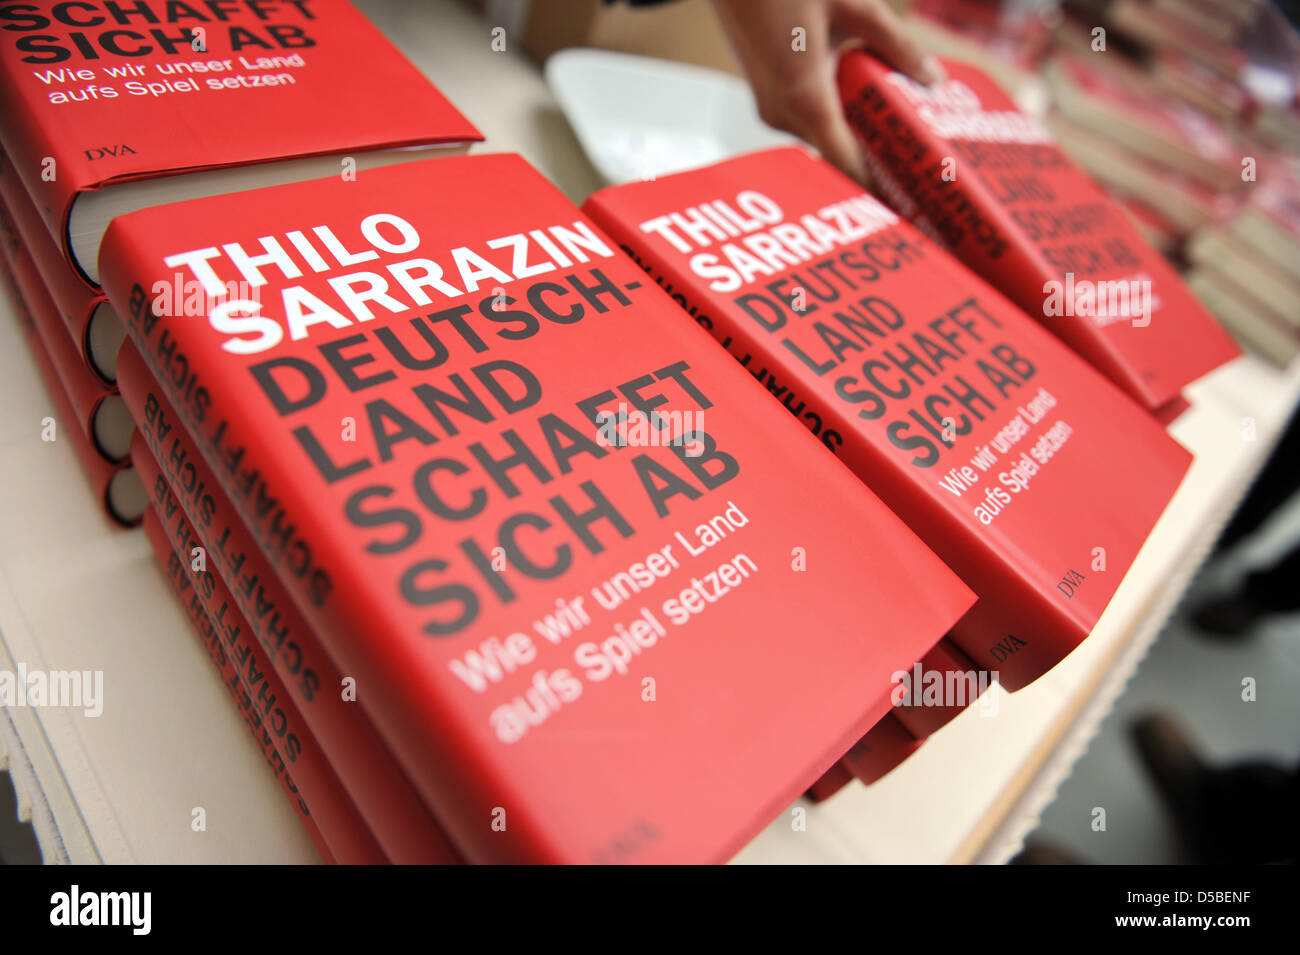 Copies of Thilo Sarrazin's book 'Germany abolishes itself: How we compromise our country' are on display at a press conference in Berlin, Germany, 30 August 2010. The controversial book outlines the author's view that Germans are in danger of becoming 'strangers in their own country' due to muslim immigration. Photo: RAINER JENSEN Stock Photo